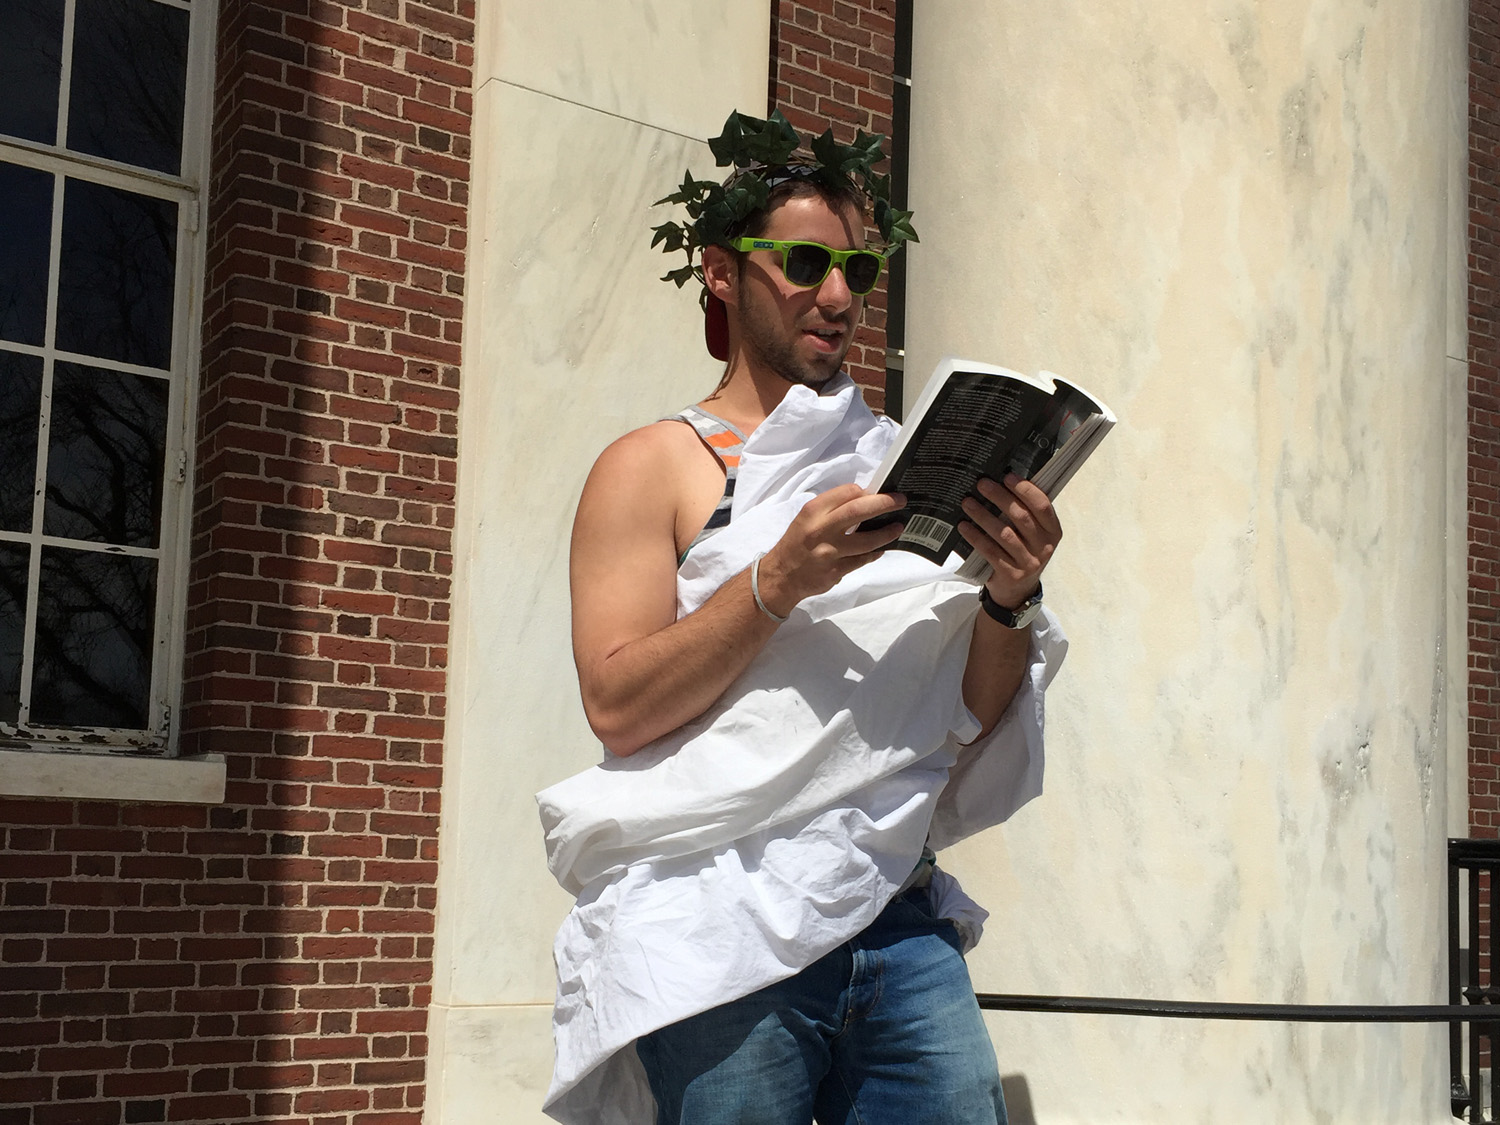 Emerson Obus '16 reads from Homer's "Odyssey" outside Olin Memorial Library on April 16 as part of the annual day-long Homerathon sponsored by the Department of Classical Studies.